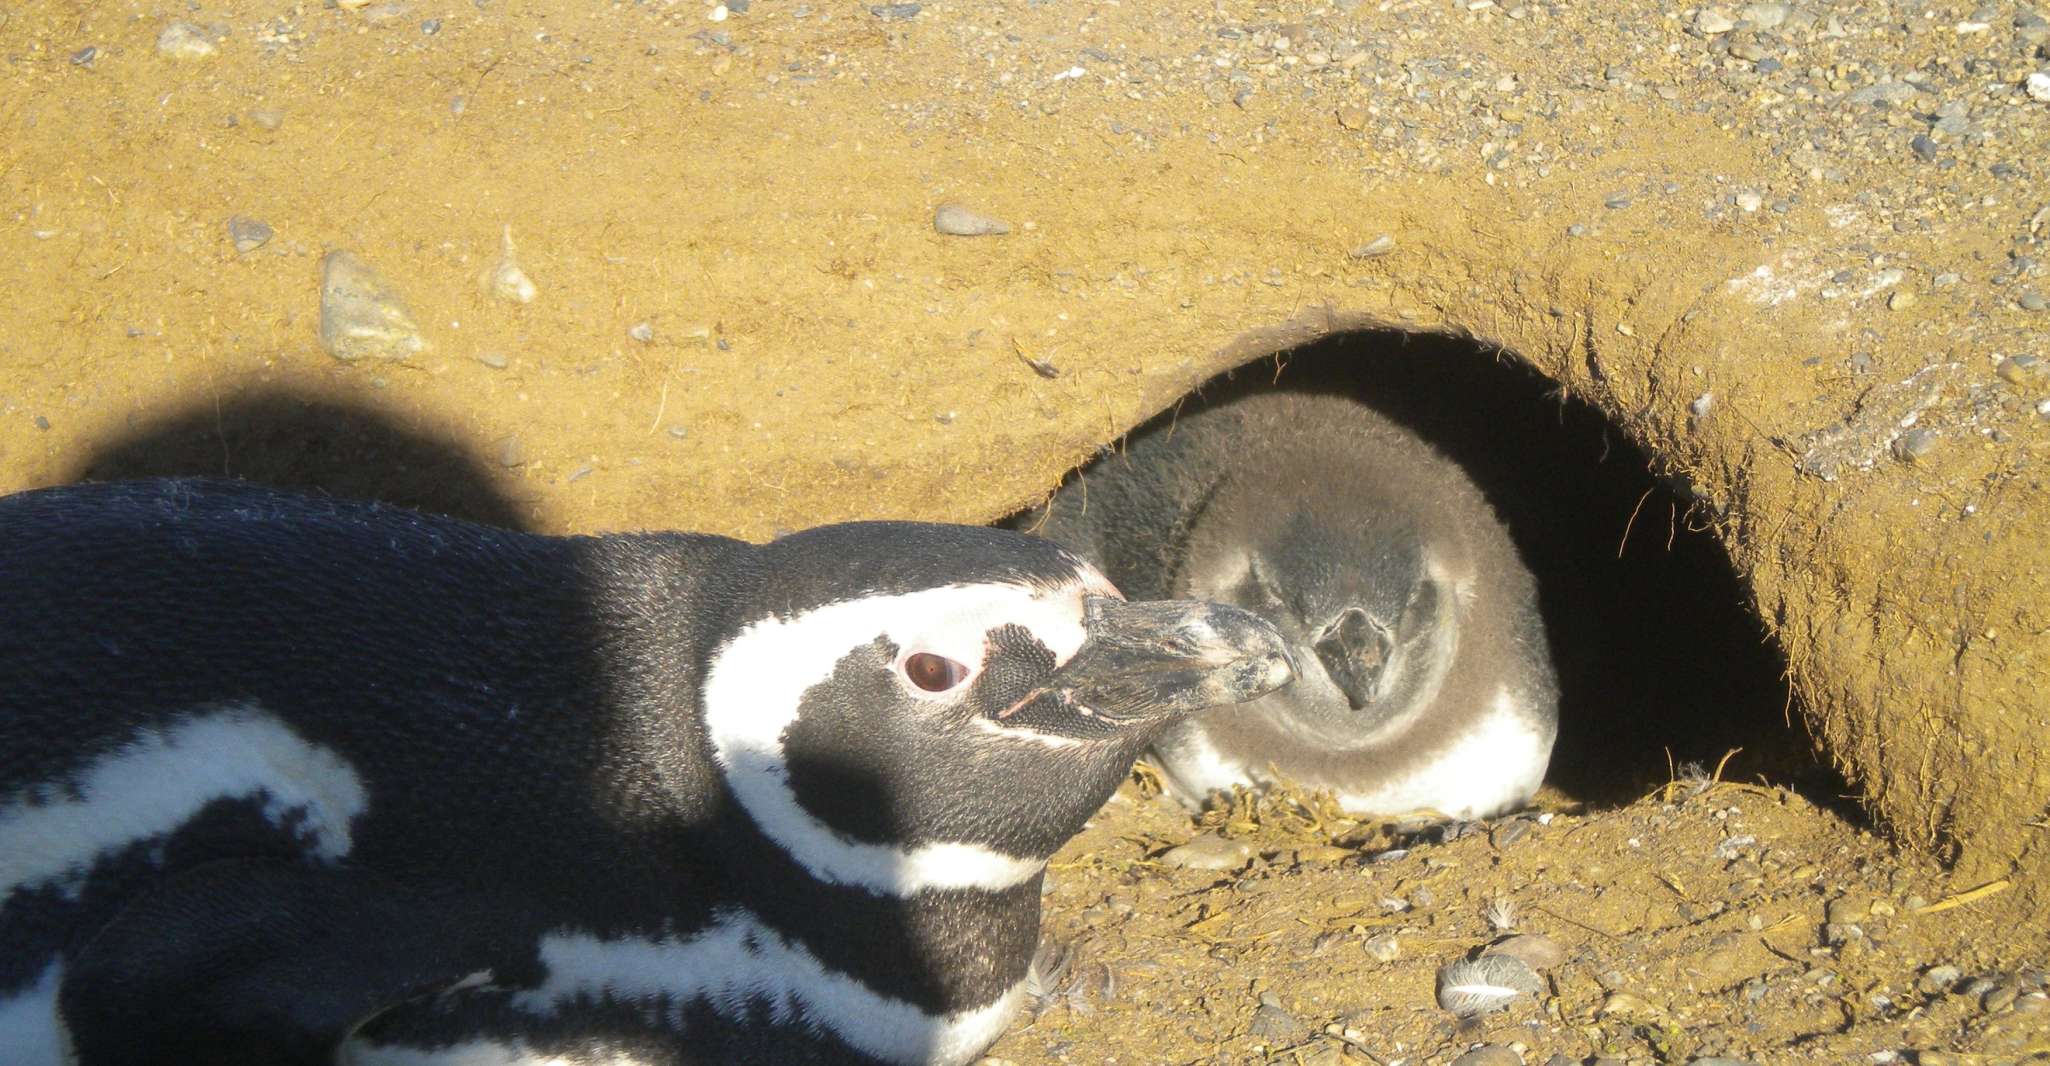 Magdalena Island Penguin Tour by Boat from Punta Arenas - Housity